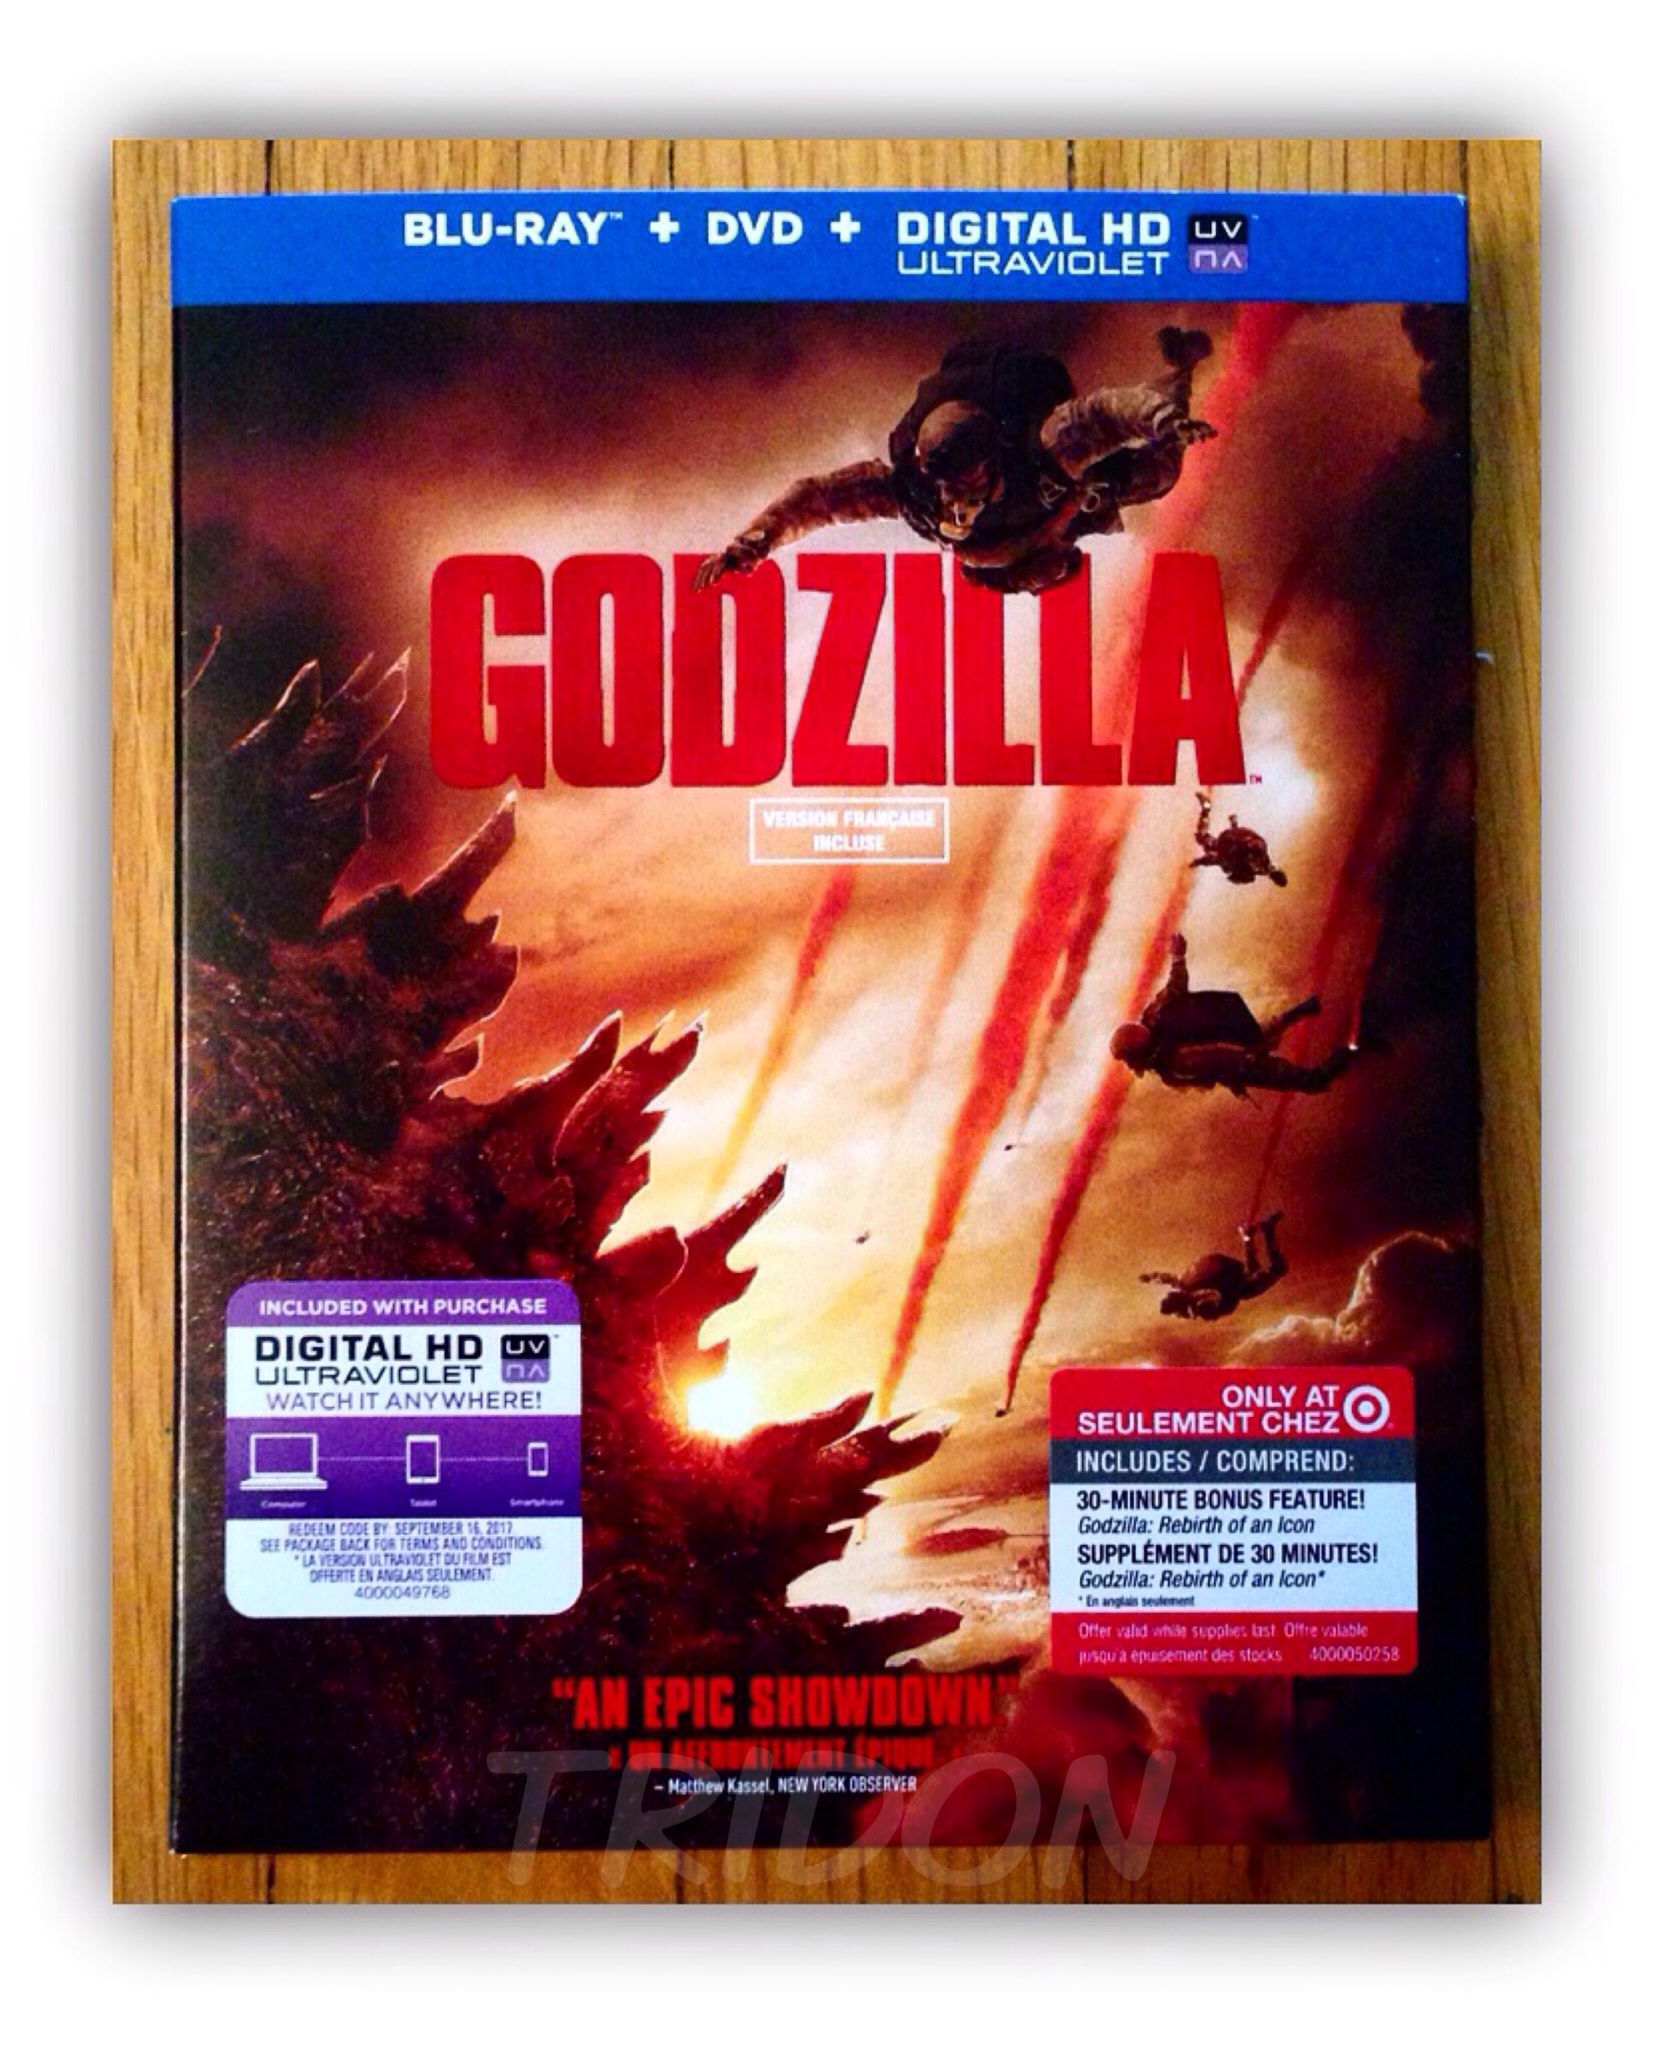 Godzilla (2014) Blu-ray w/ slipcover (Target Excl.) [CAN]